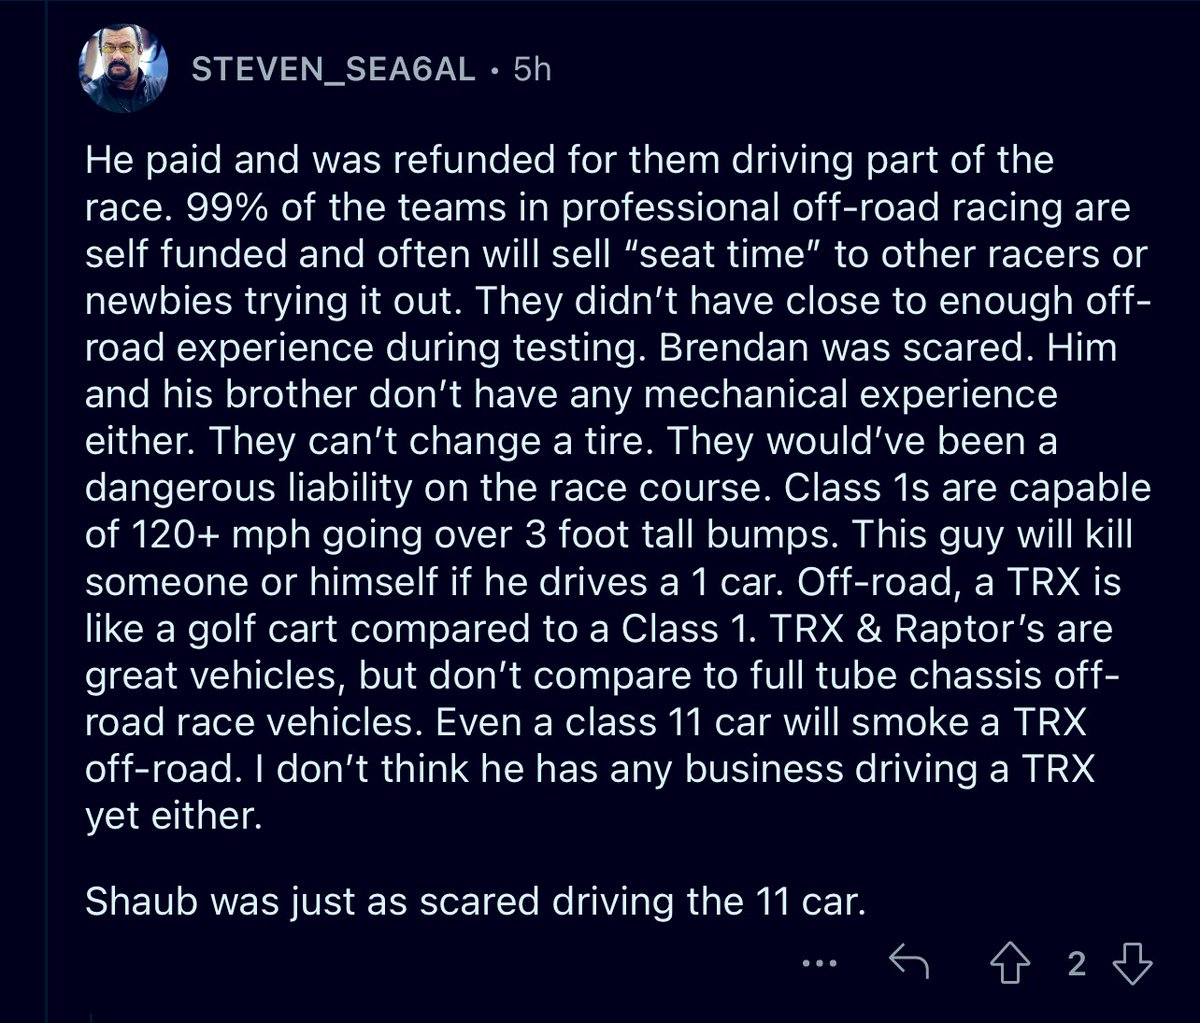 Update #2 on Brendan Schaub racing at the #Mint400

#exposed #oops #liar #LARP #UFC
#cosplayer #MMA #offroad #comedy 
#cloutchaser #grifter #JRE #cosplay